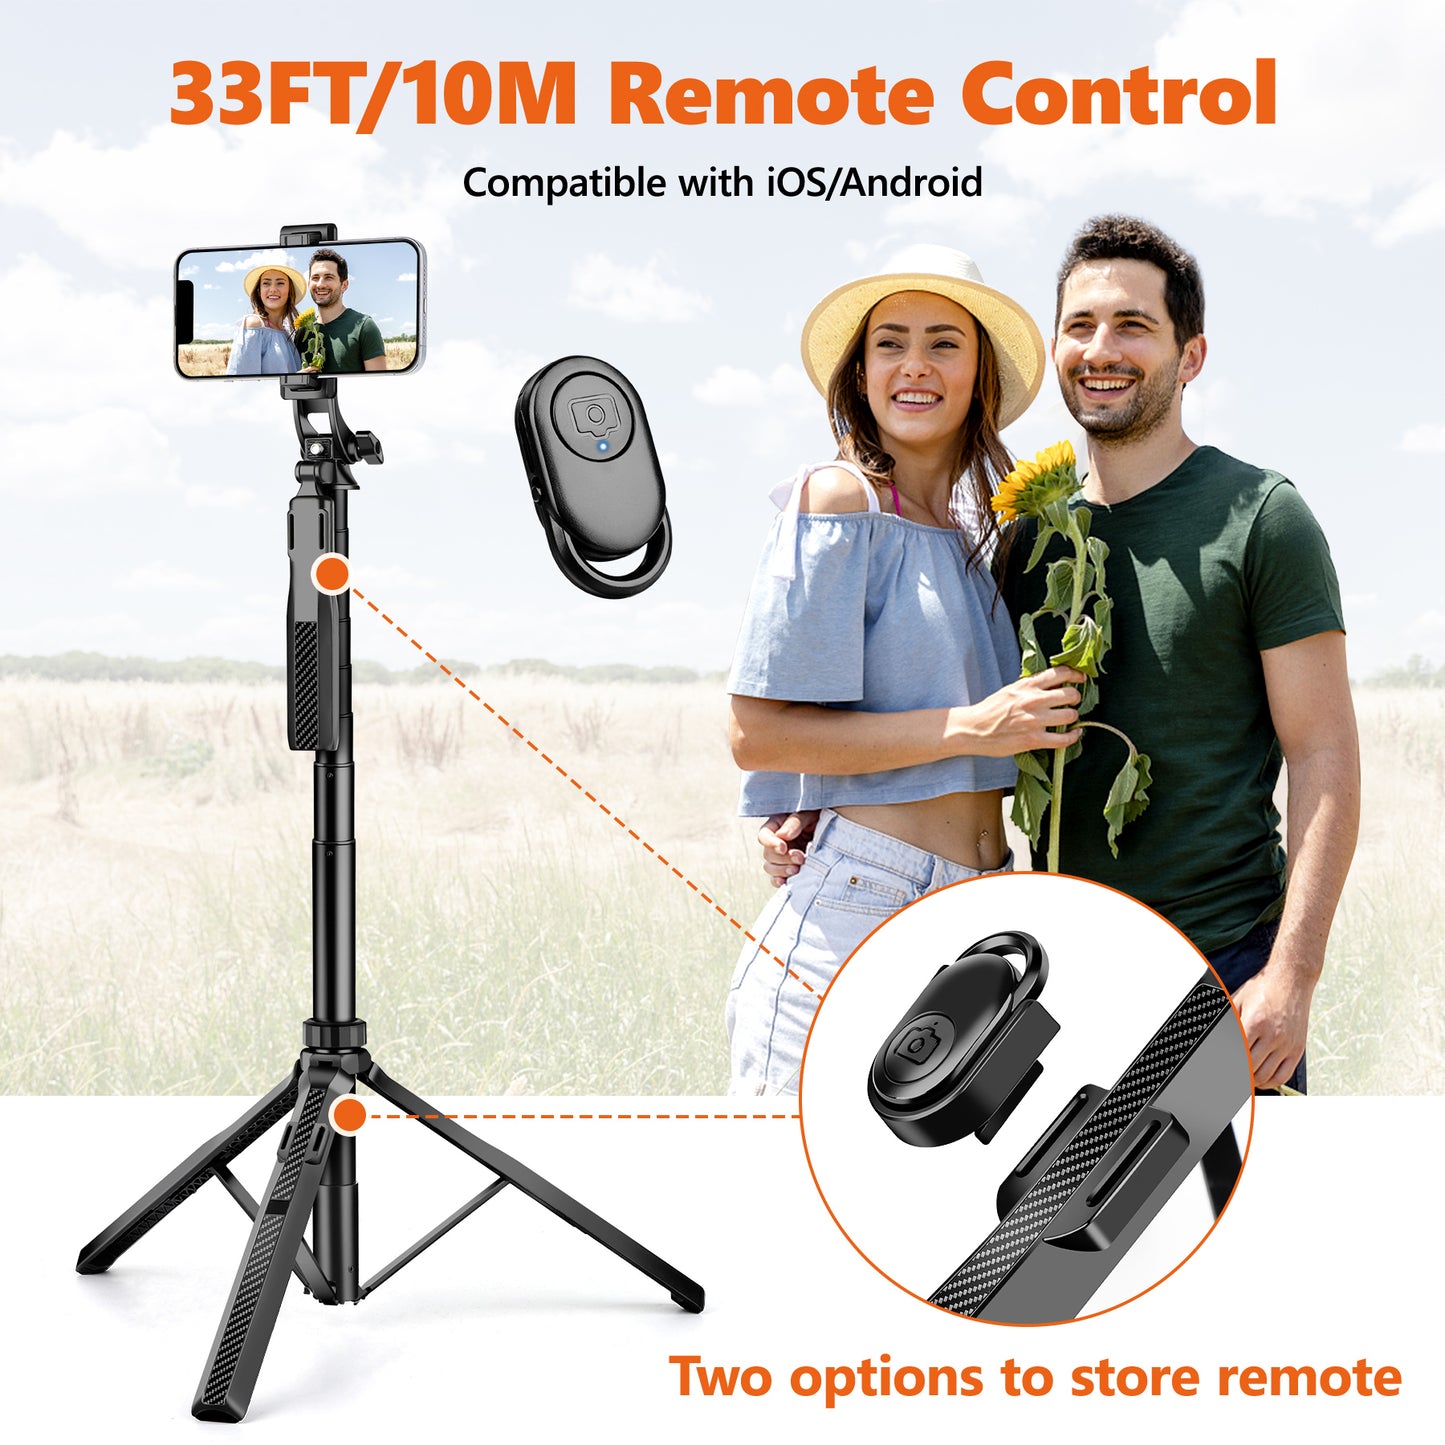 JOILCAN 70" Cell Phone Selfie Stick Tripod, Extendable Mobile Phone Tripod with Remote, Portable Smartphone Tripod Stand with Anti-Shake Handle, Selfie Monopod Compatible with iPhone/Samsung/Huawei(EU)